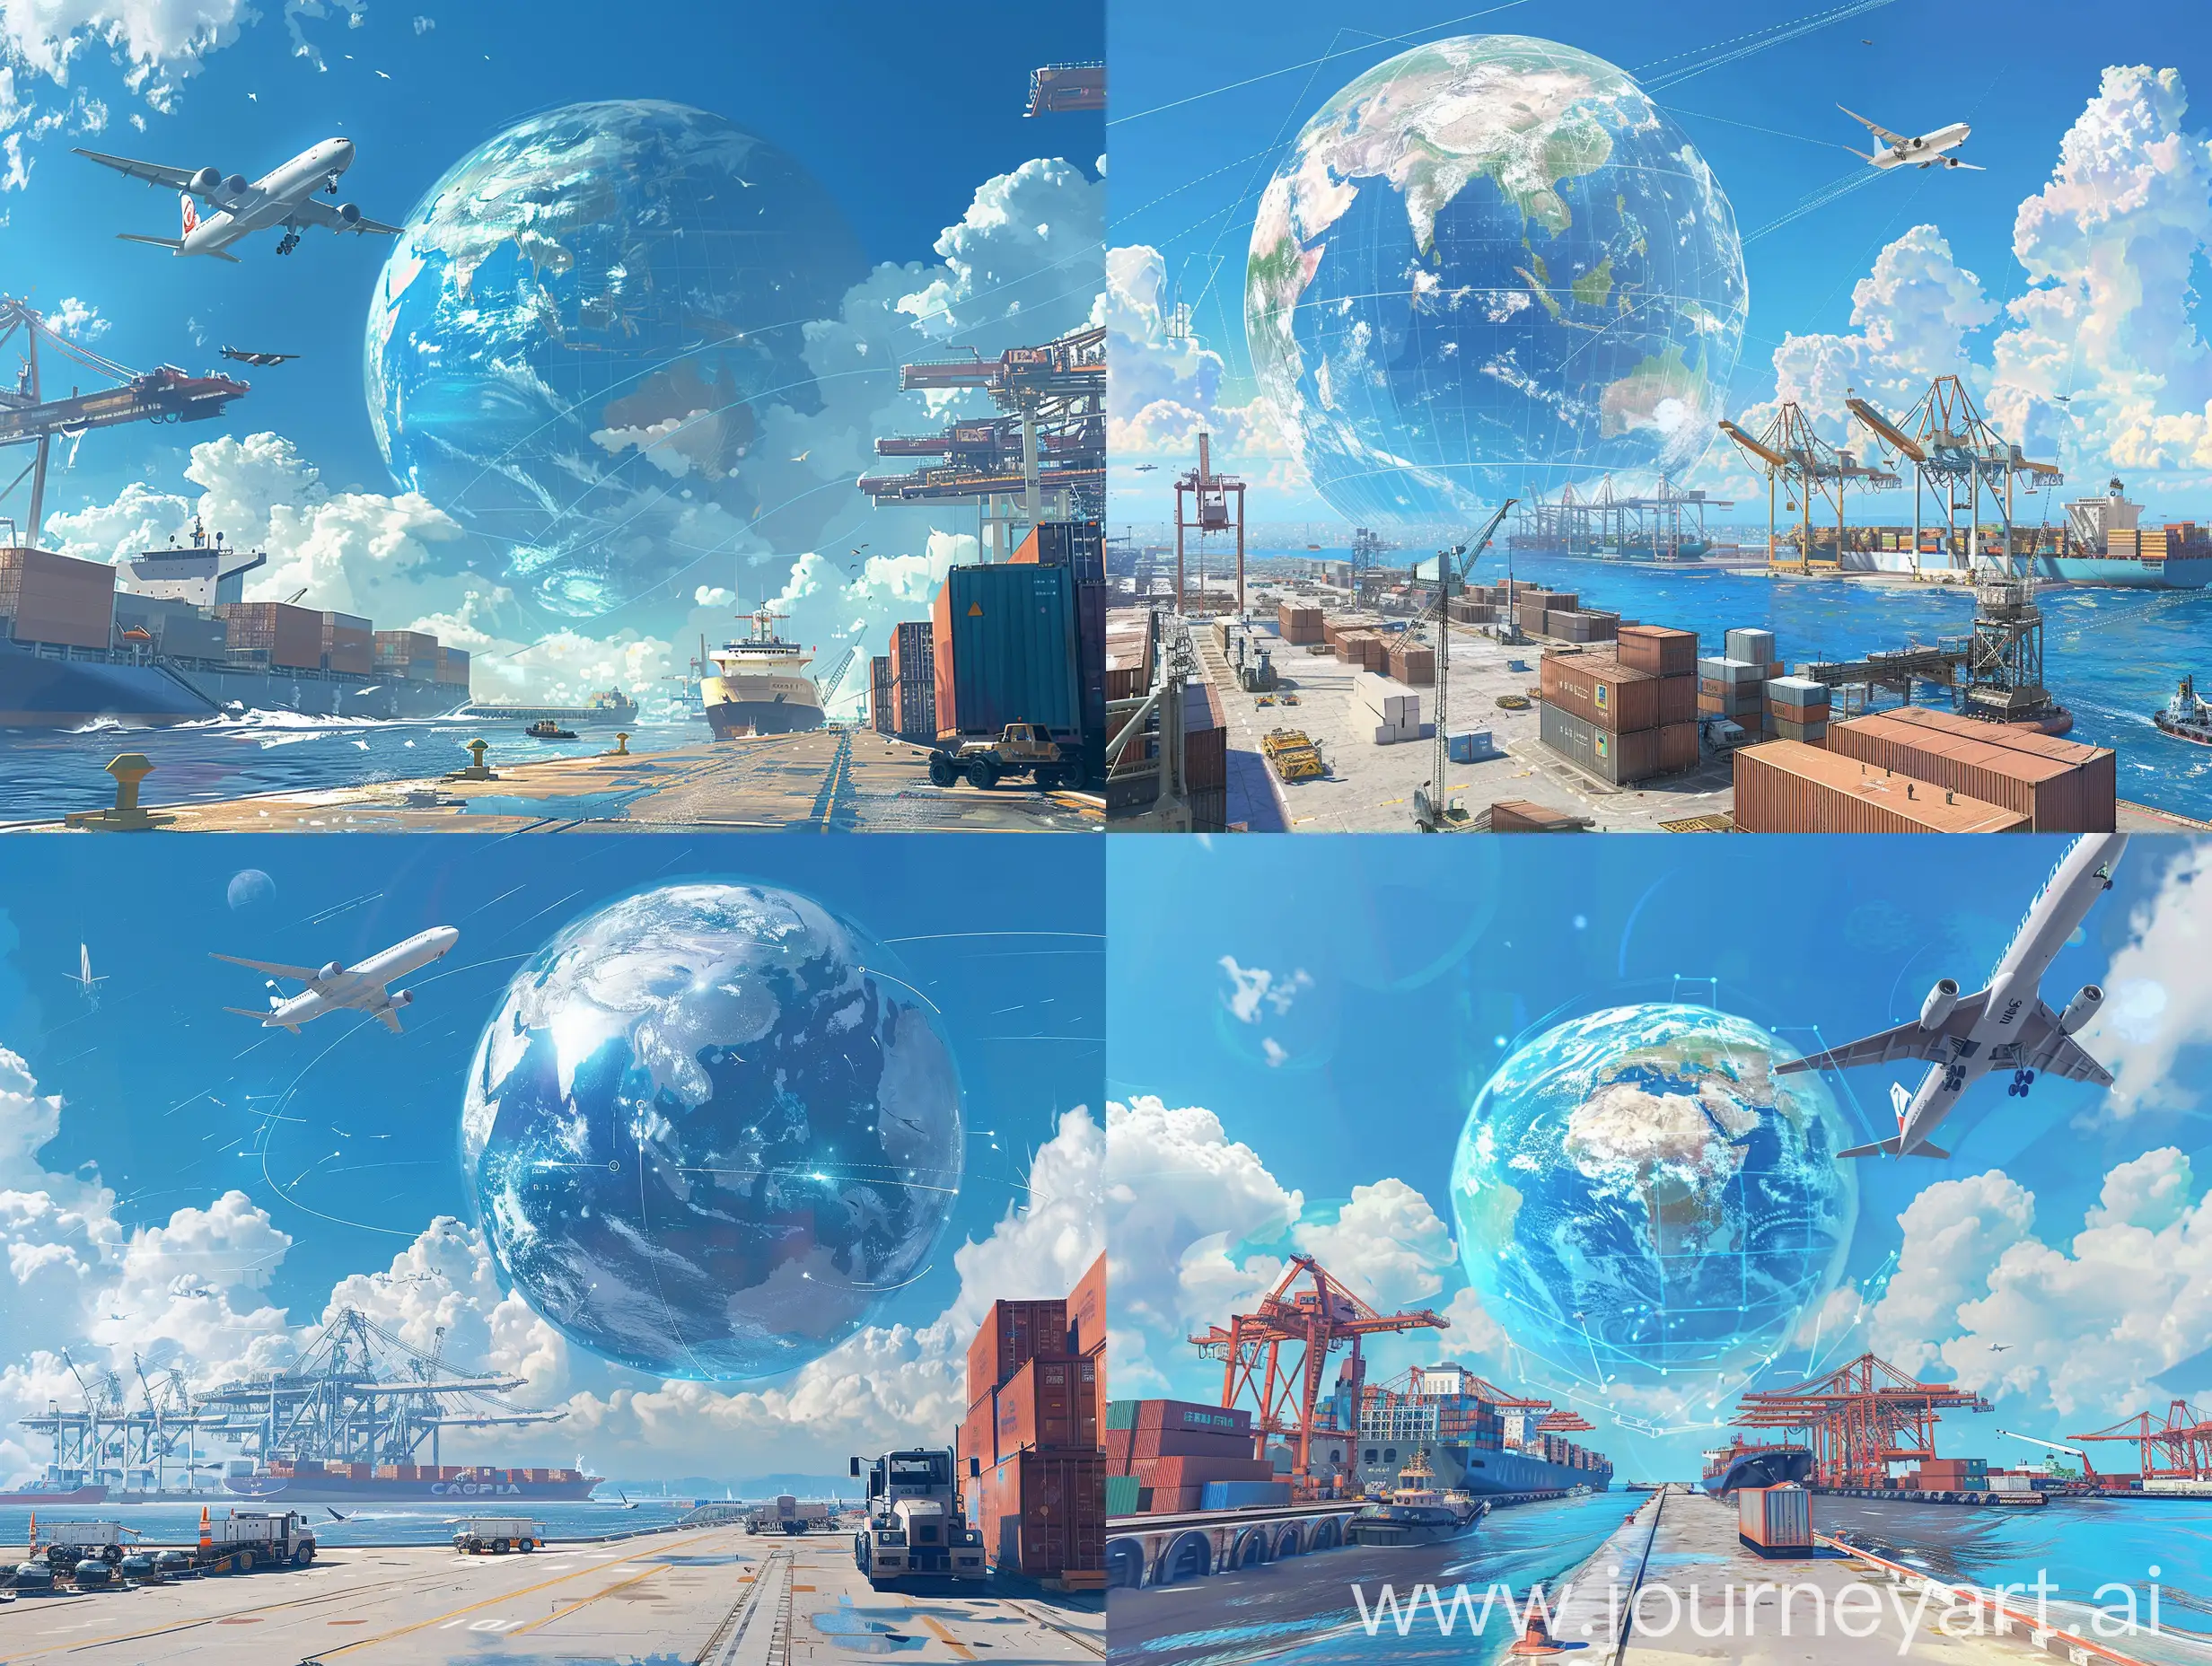 Port scene on a nice sunny day, blue sky, a big transparent globe with light blue trade lines in the background center, a big white airplane flying around the globe, a big cargo ship on the ocean and containers along with port equipment on the ground. Make it ultra-realistic and blend everything seamlessly